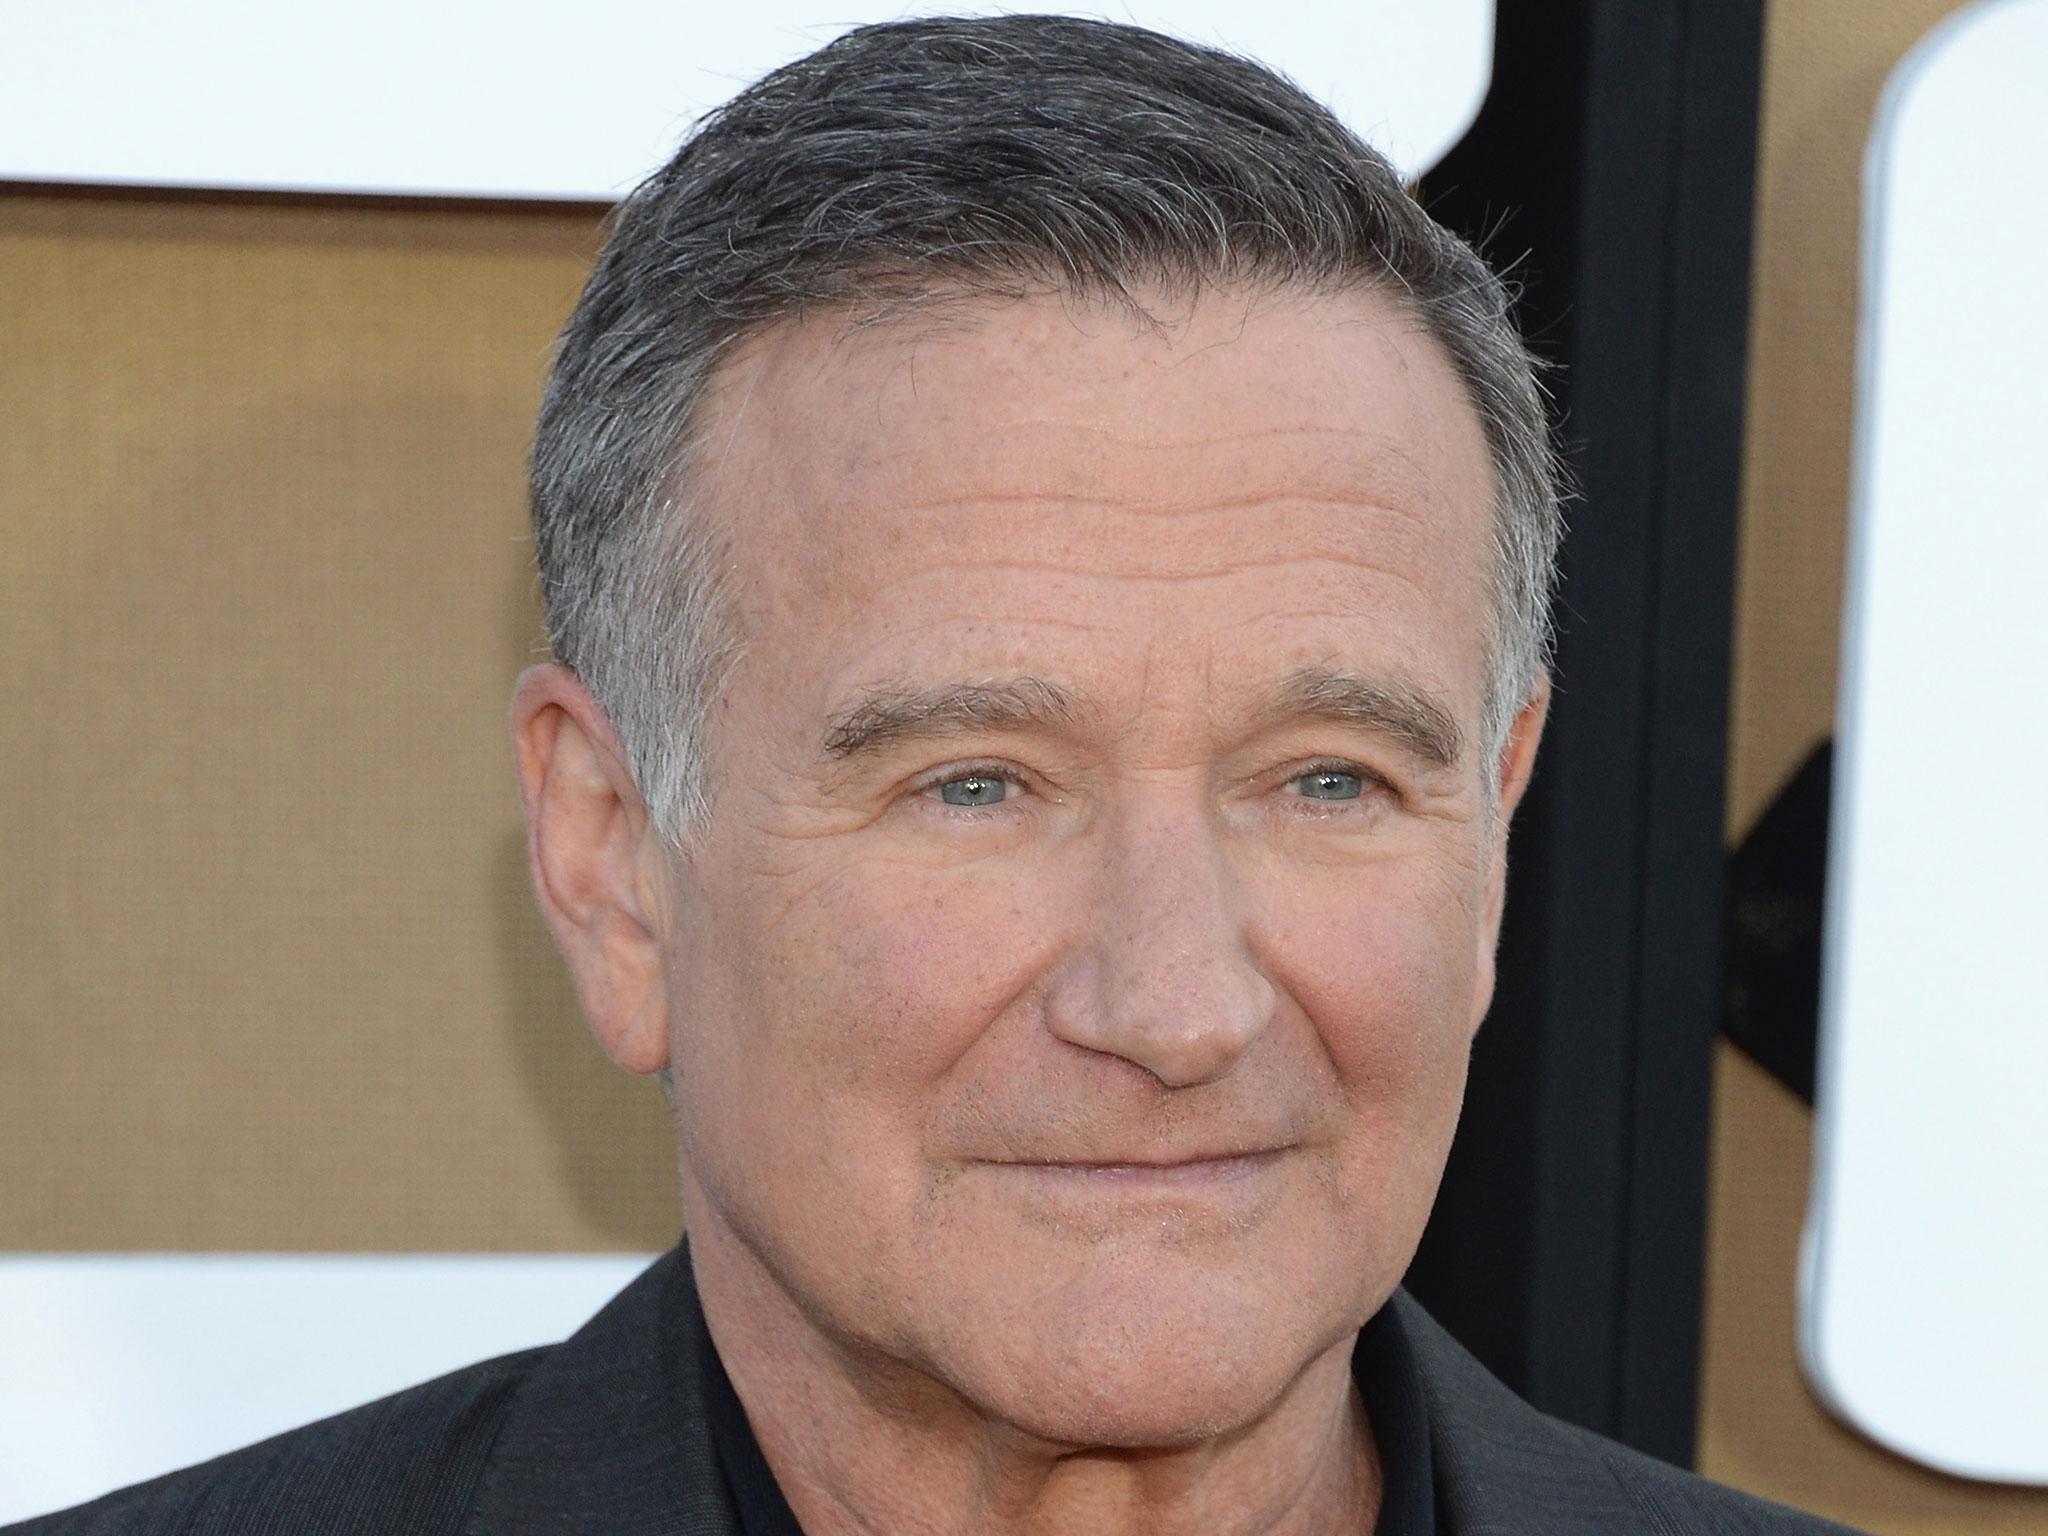 Robin Williams, who died in August 2014